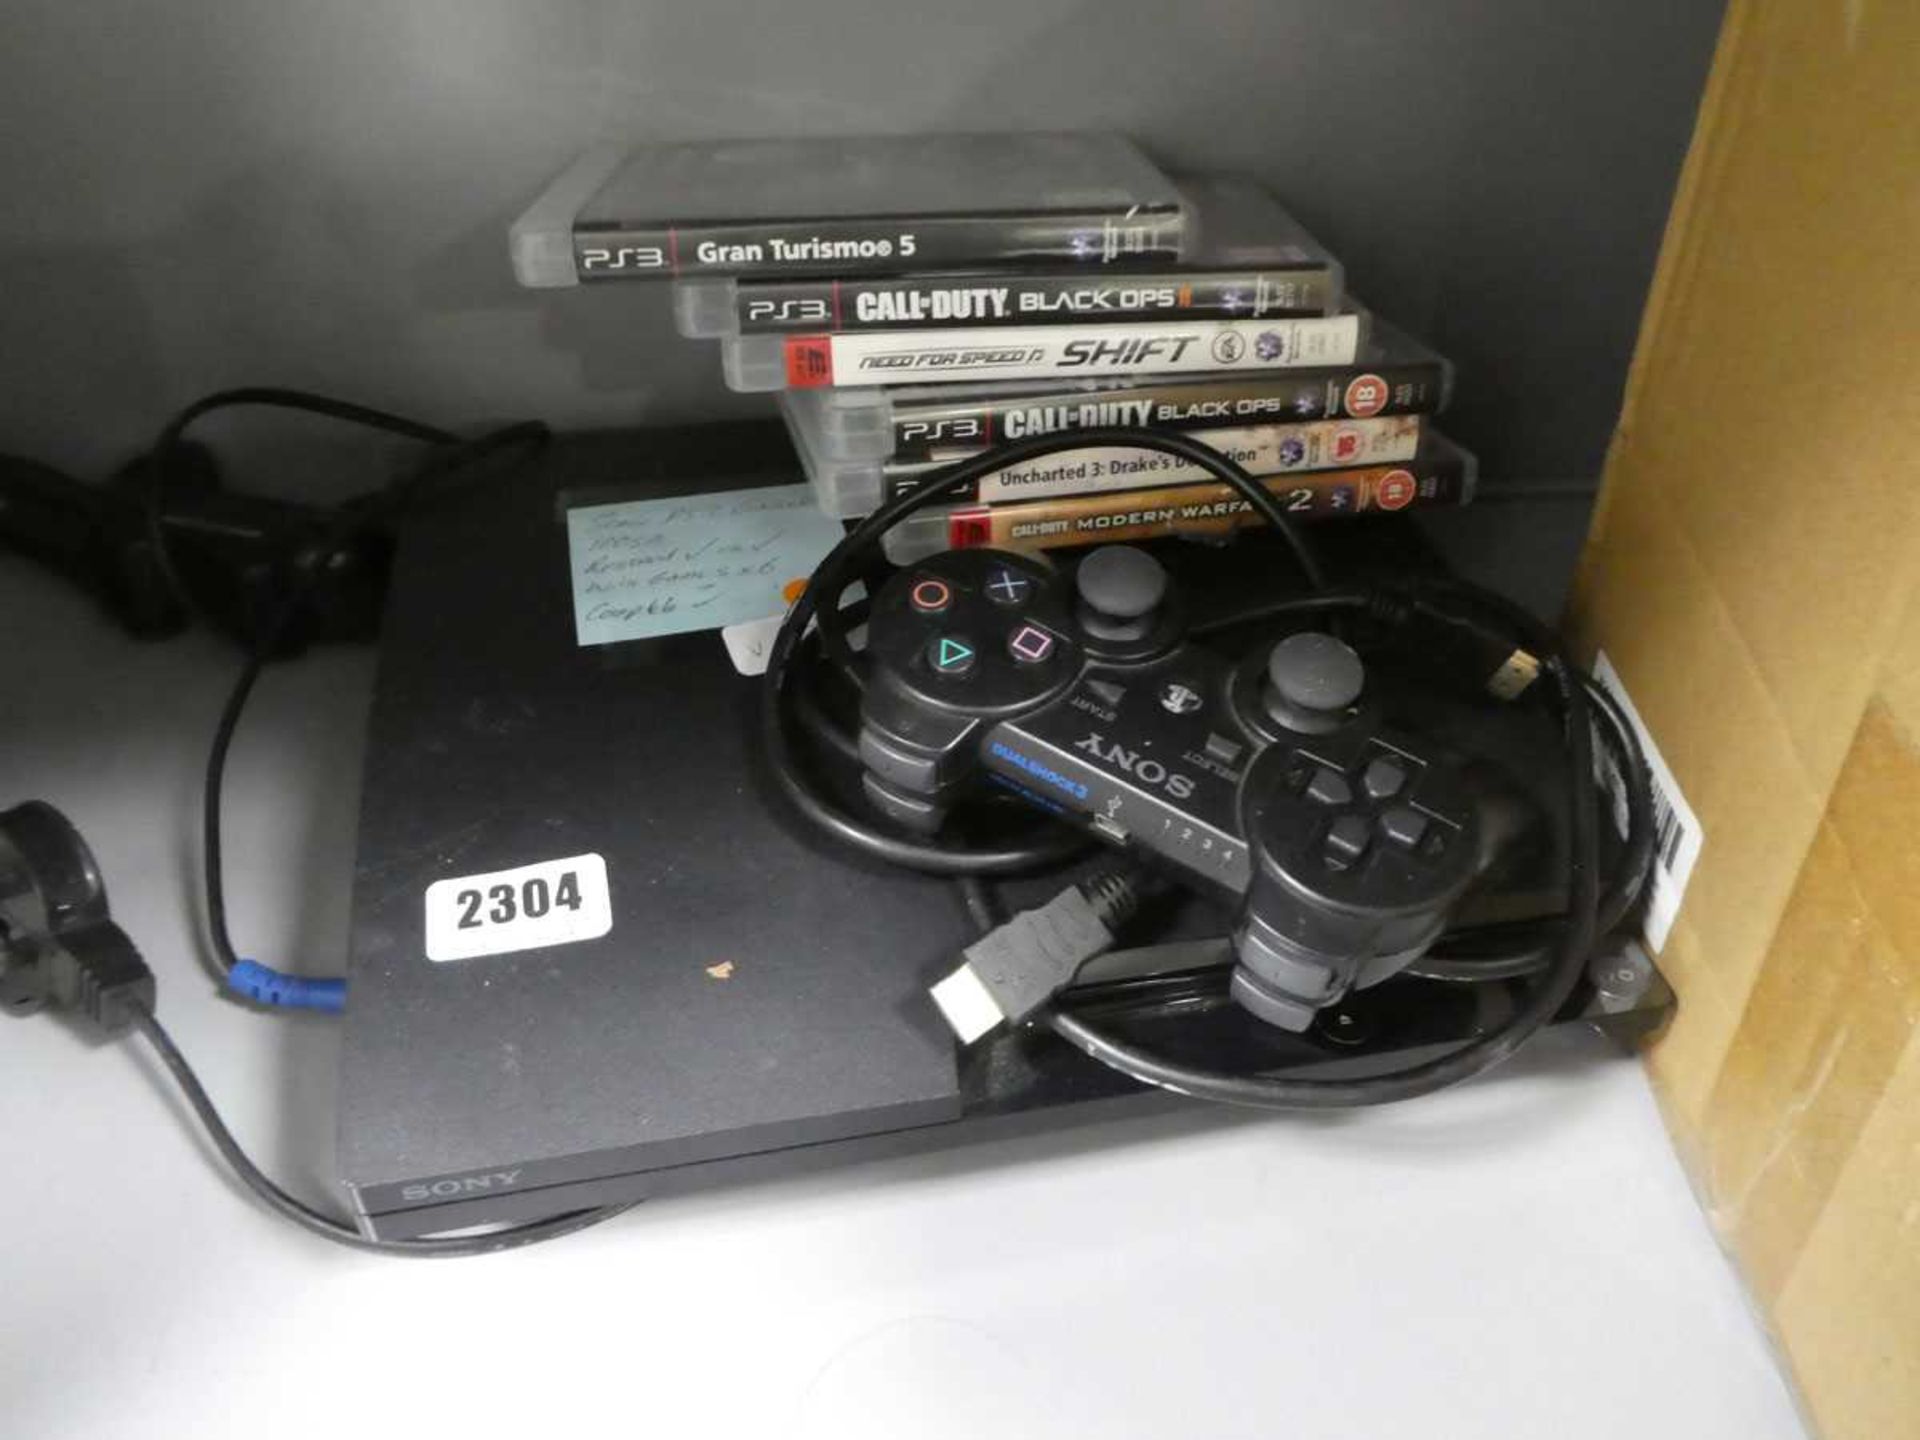 Sony PS3 console, 120GB, with games and controllers, with psu